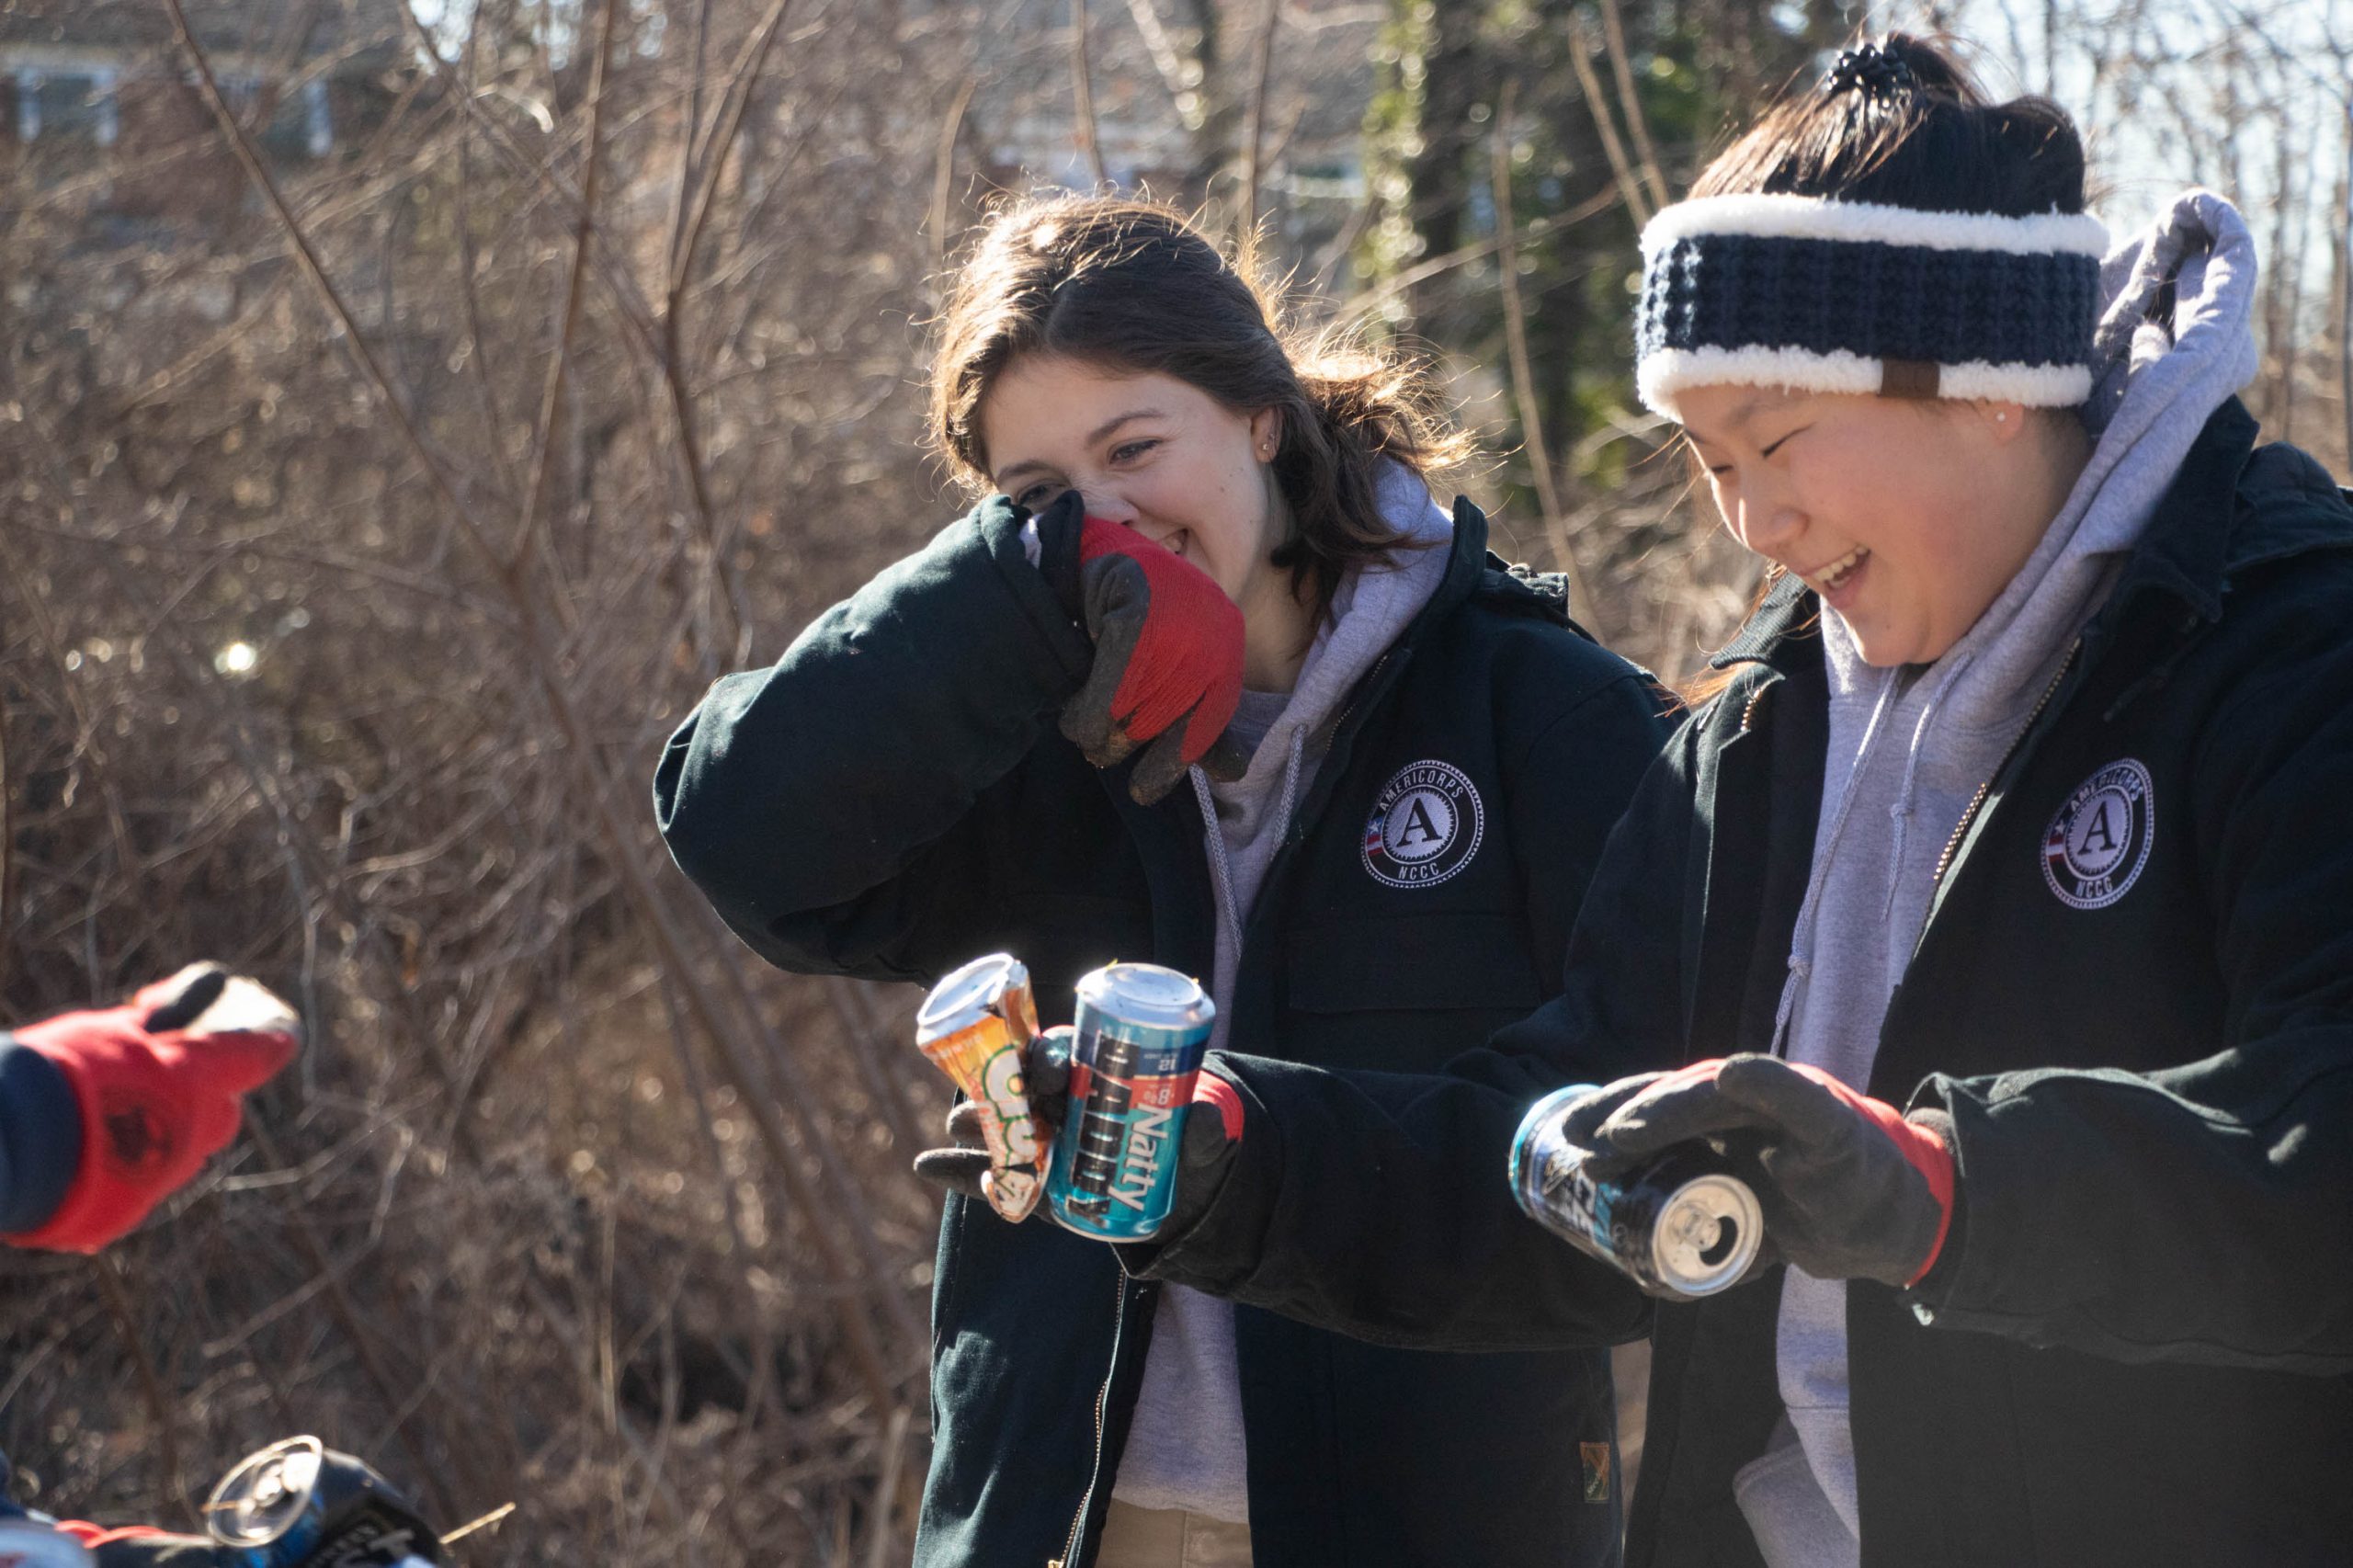 Members of AmeriCorps helped to sort and weigh trash after volunteers picked it up.  (Isabel Miller | Medill News Service)